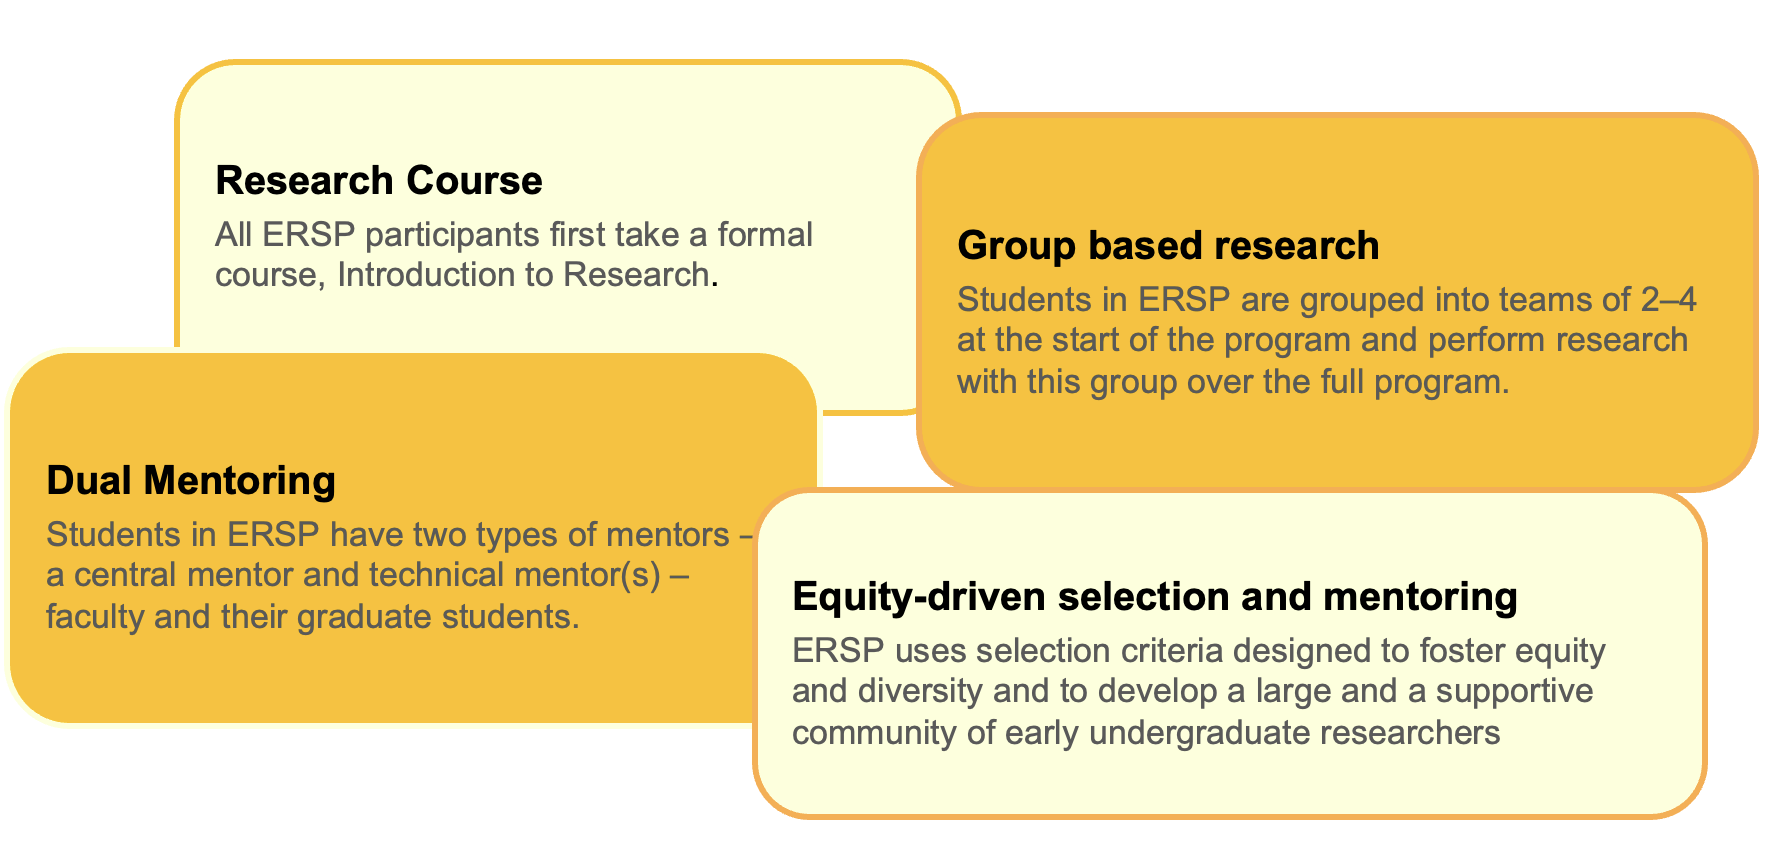 The essential components of ERSP